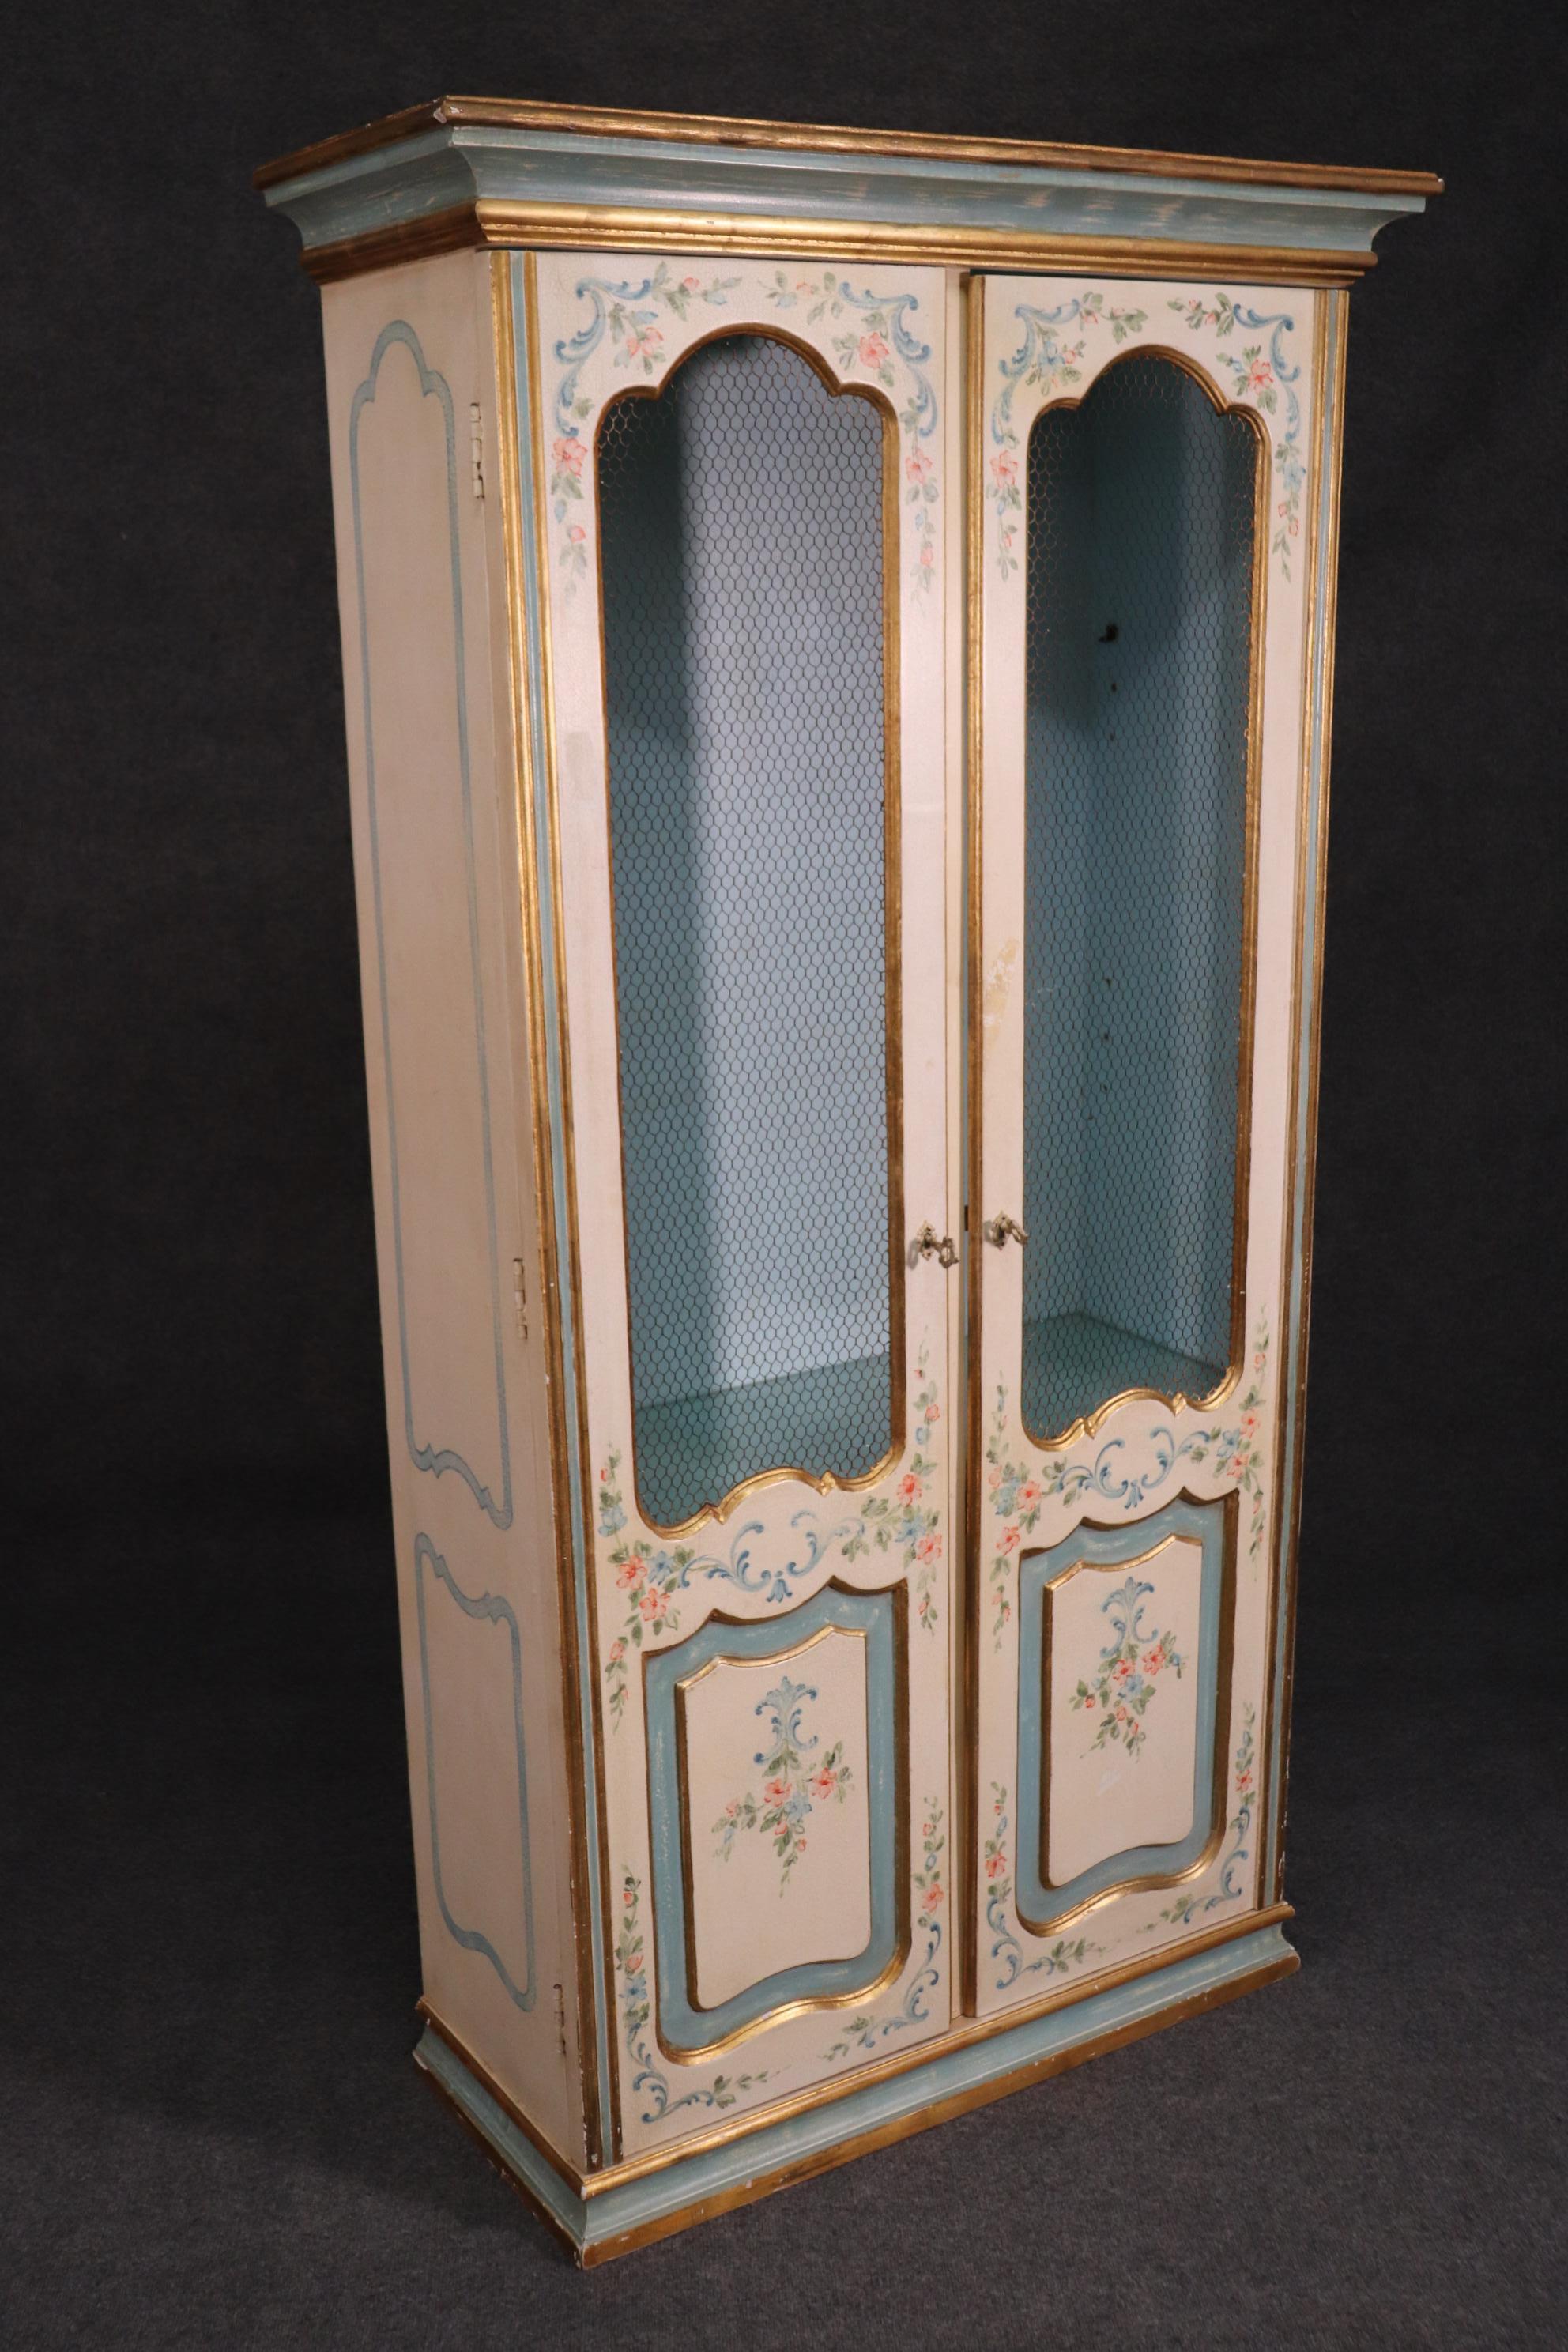 This is a beautiful paint decorated display cabinet with a mesh grill insert for a light and airy feel. The cabinet dates to the 1940s and is Italian. Measures: 76 tall x 41 wide x 17 deep.